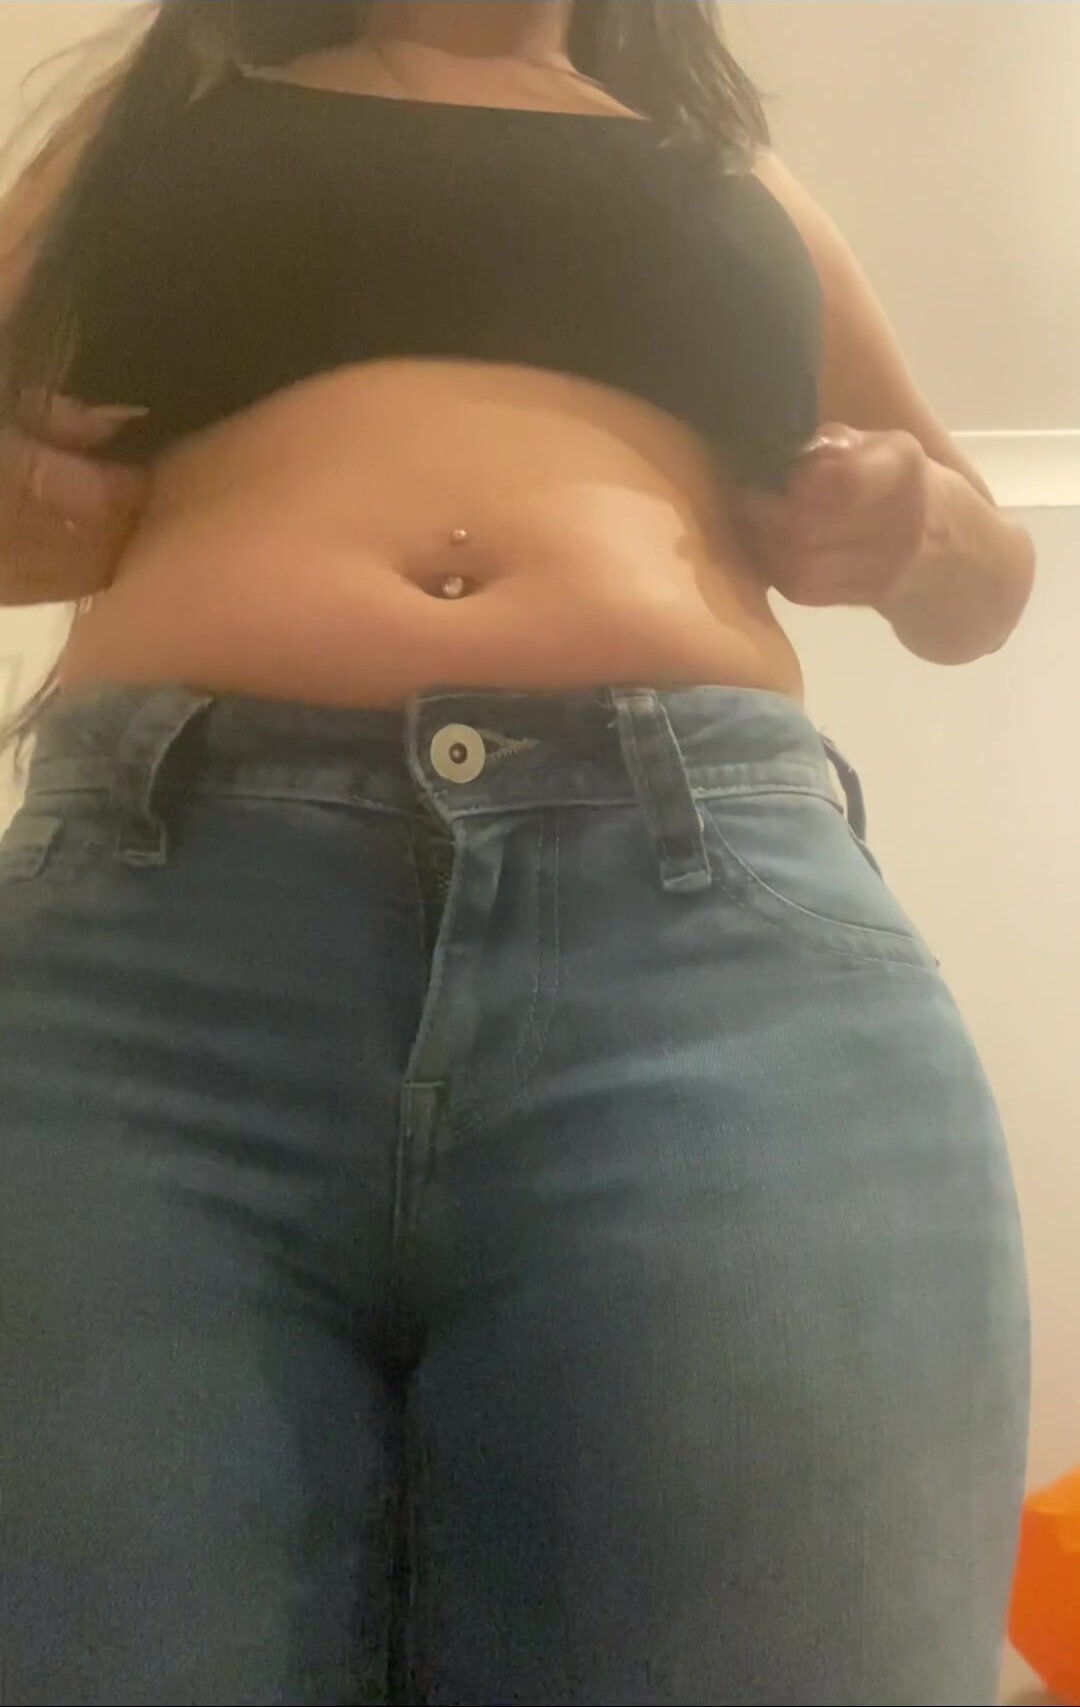 Jeans try on - video 2